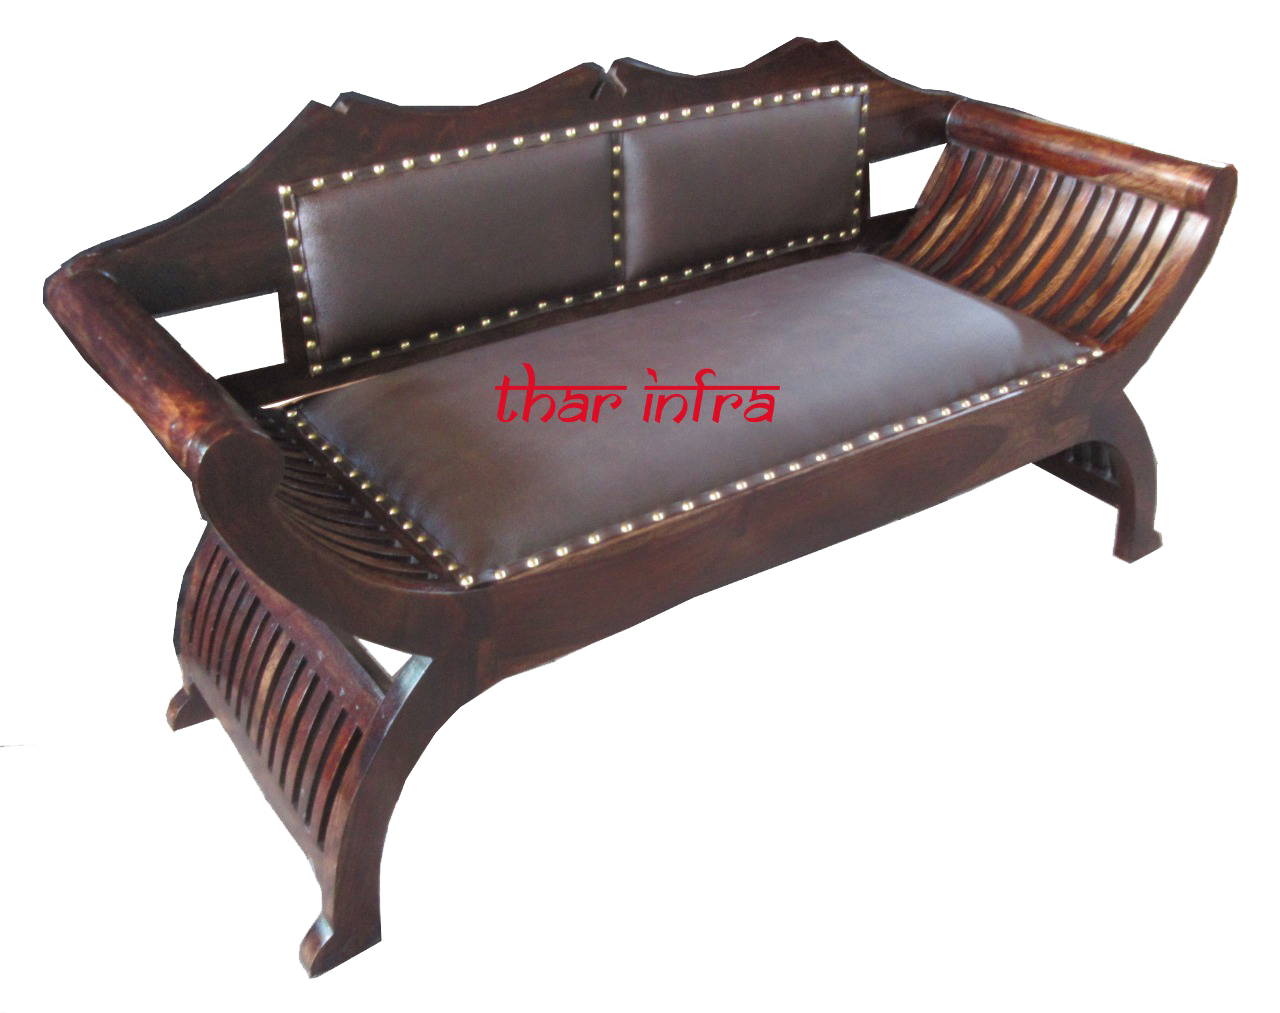 Thar Infra (A Handicrafts Furniture manufacturer) was established in 2010 after months of market research in the furniture industry.